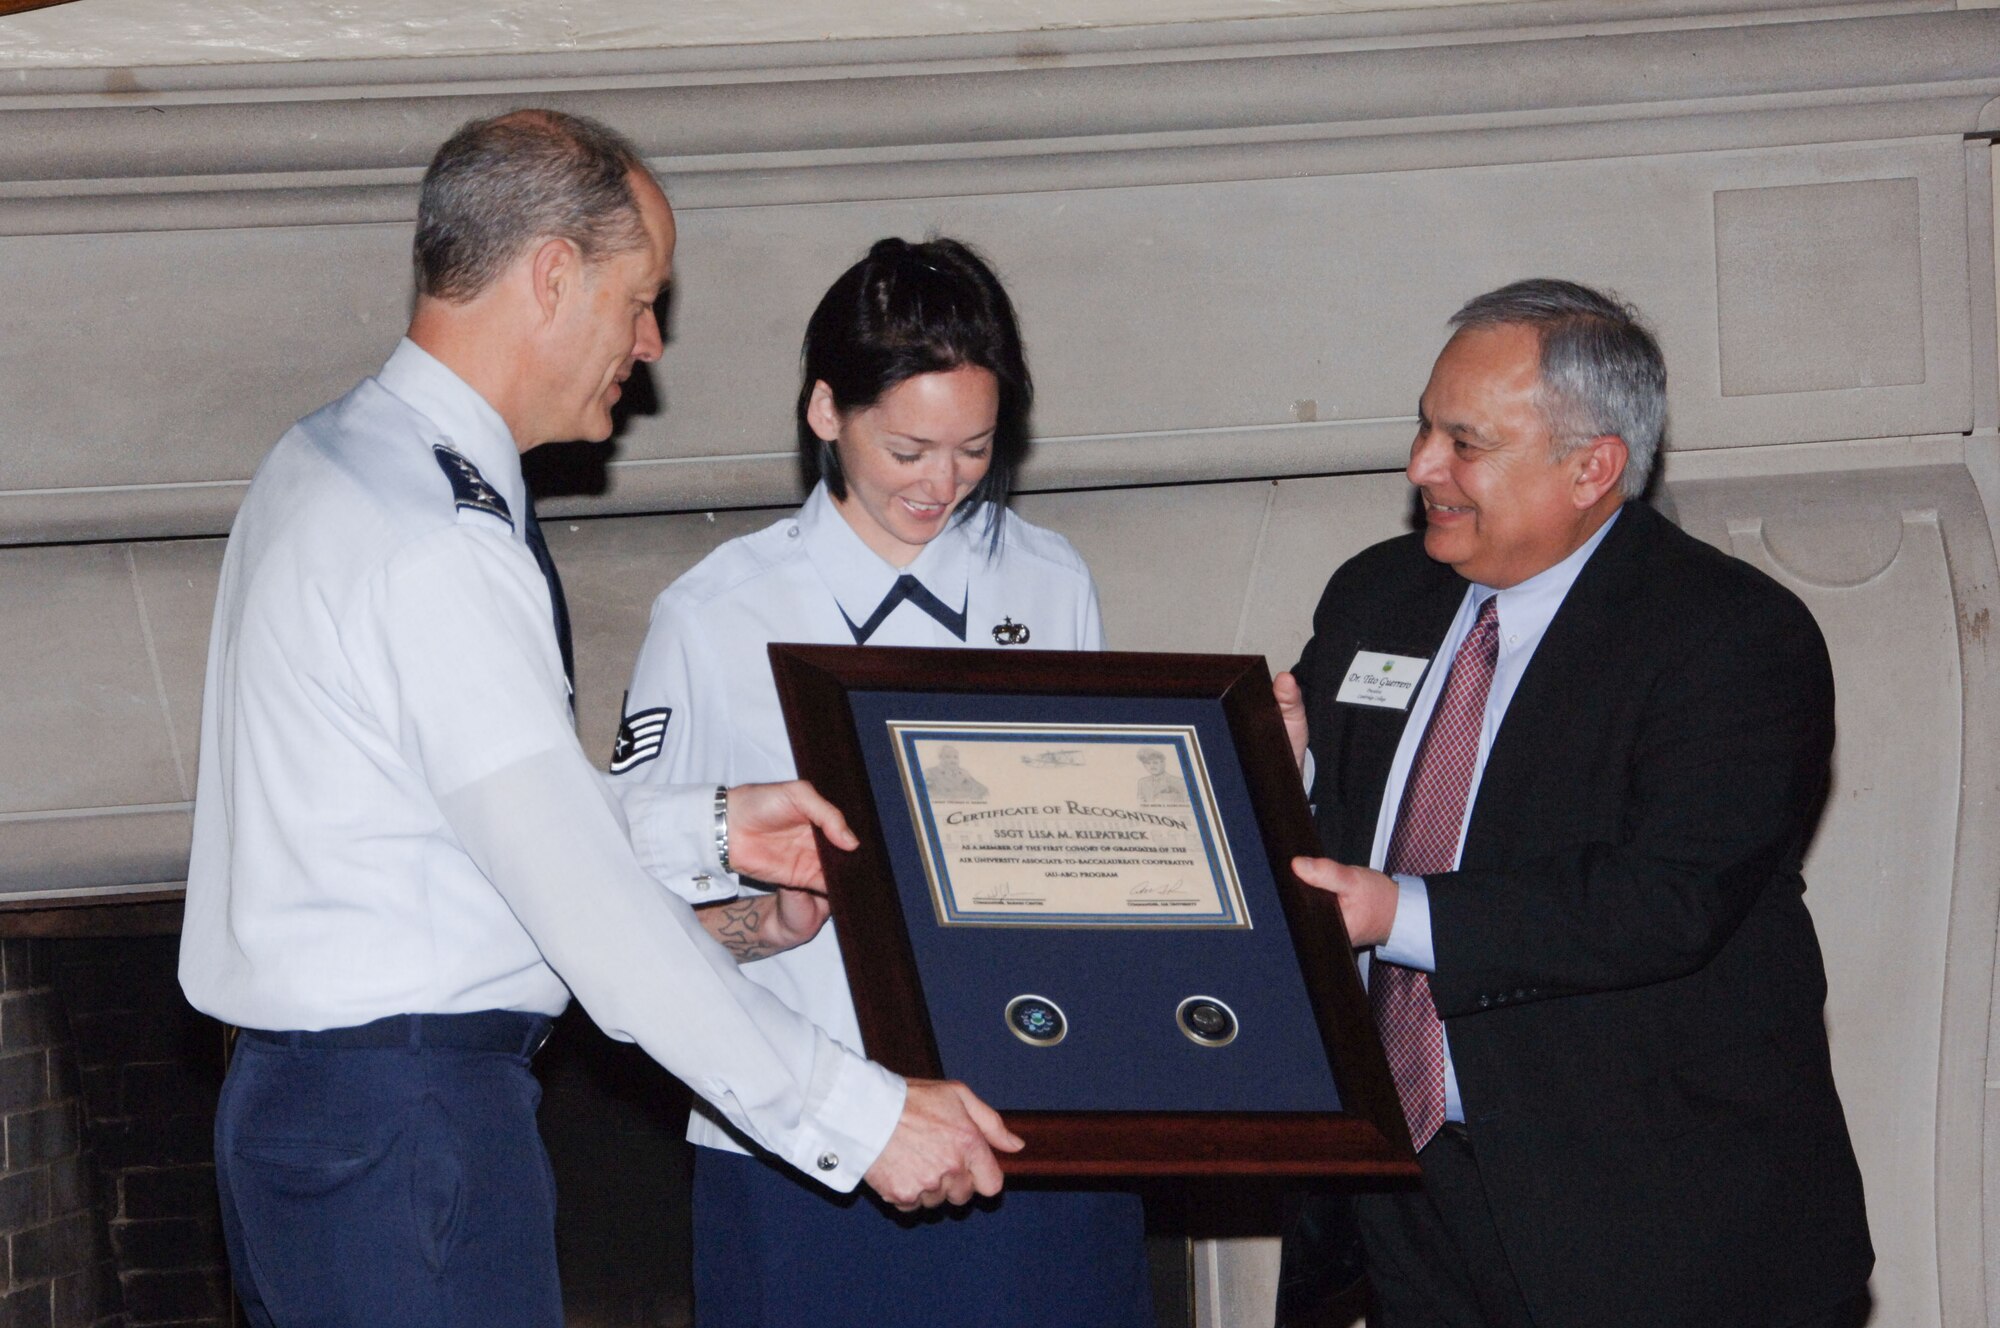 In honor of the first group of graduates of the Air University Associate-to-Baccalaureate Cooperative program, Lt. Gen. Allen Peck, Air University commander, and Tito Guerreo, Air University Board of Visitors chair, presented a plaque of recognition to Staff Sgt. Lisa Kilpatrick. Sergeant Kilpatrick, an Airman Leadership School instructor from Eglin Air Force Base, Fla., was one of the first to complete her ABC degree, accepted the plaque on behalf of all the members of the first cohort of ABC program graduates at a BOV luncheon at the Maxwell Officers Club April 22. At the event, board members had the opportunity to talk with current students of the program about their experiences, and the education they are receiving. (U.S. Air Force photo by Melanie Rodgers Cox)